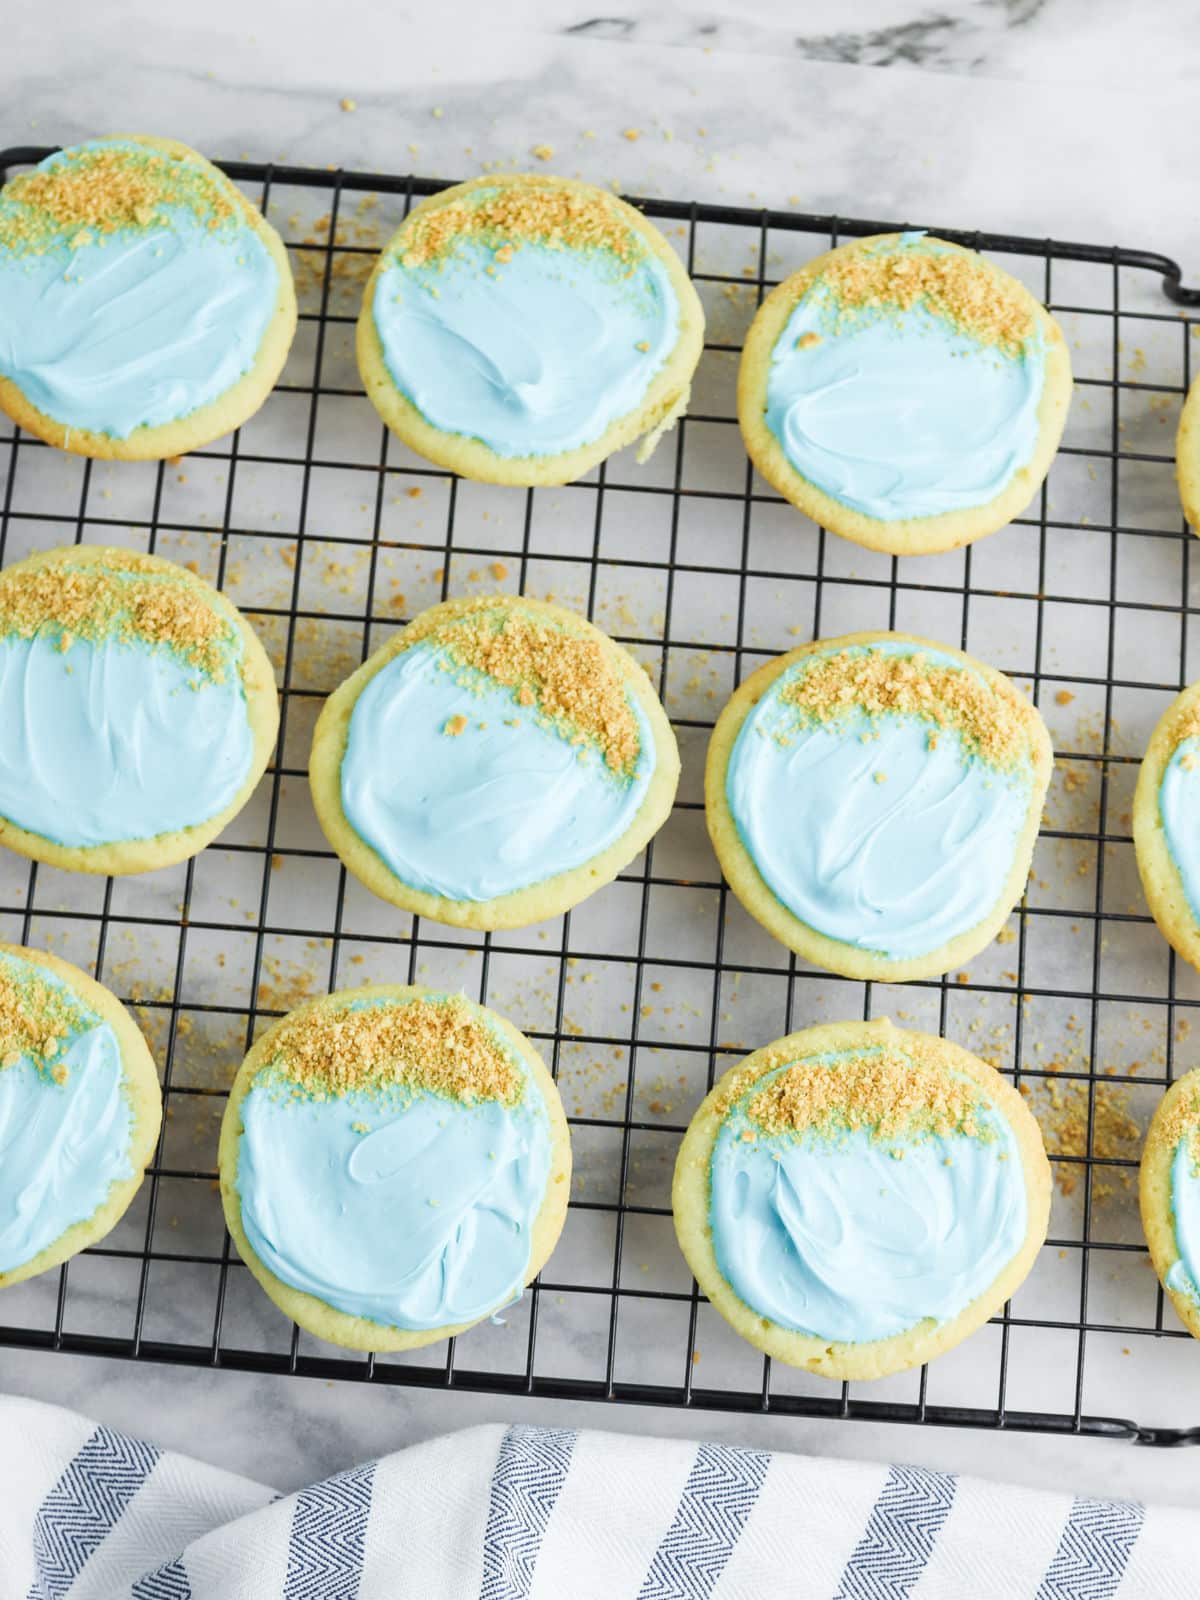 Cookies with blue icing and graham cracker crumbs on a cooling rack.